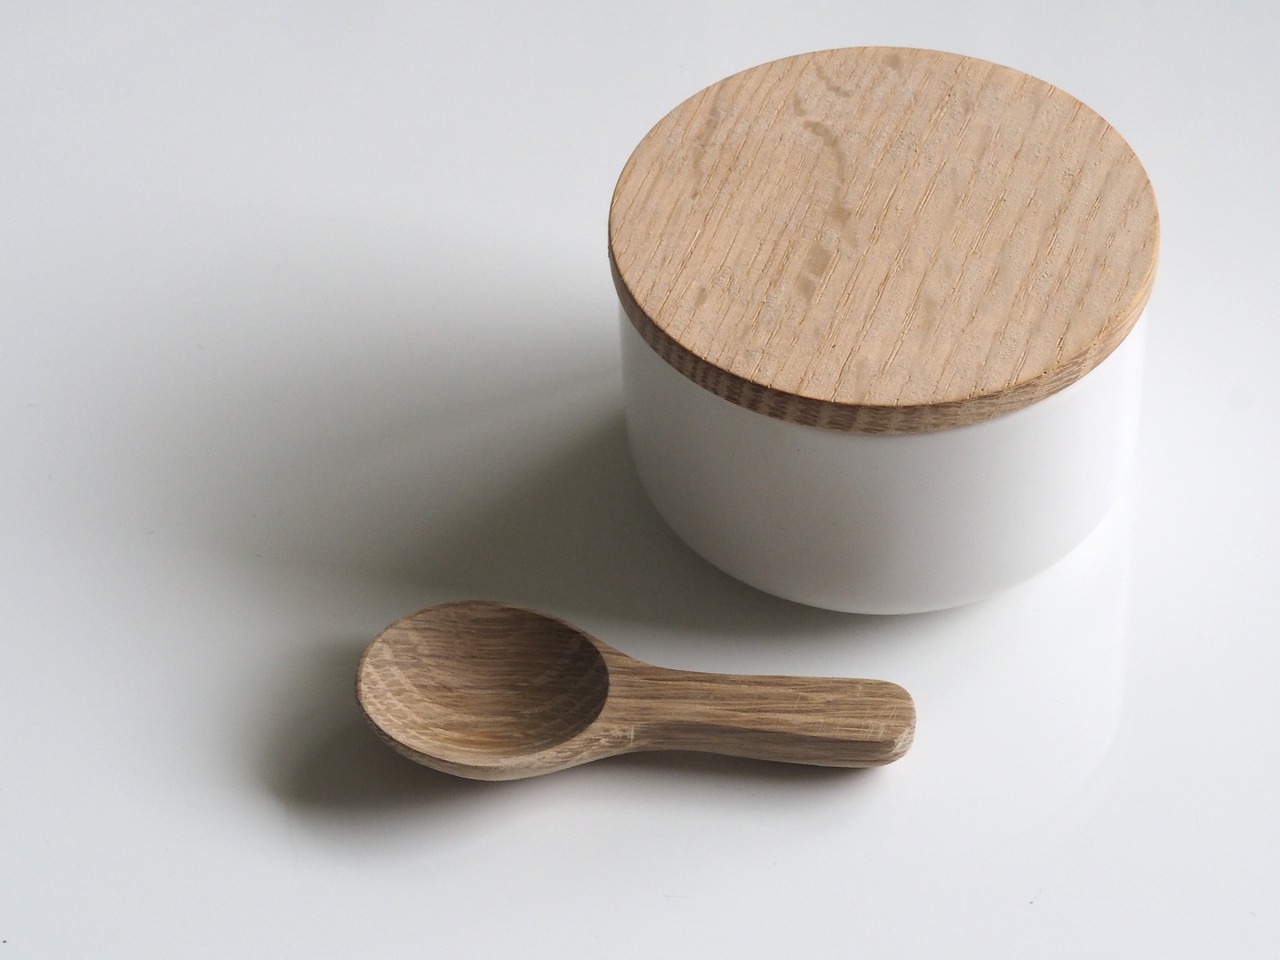 a white container with a wooden spoon next to it, inspired by Jakob Emanuel Handmann, ello, けもの, oak, small scale